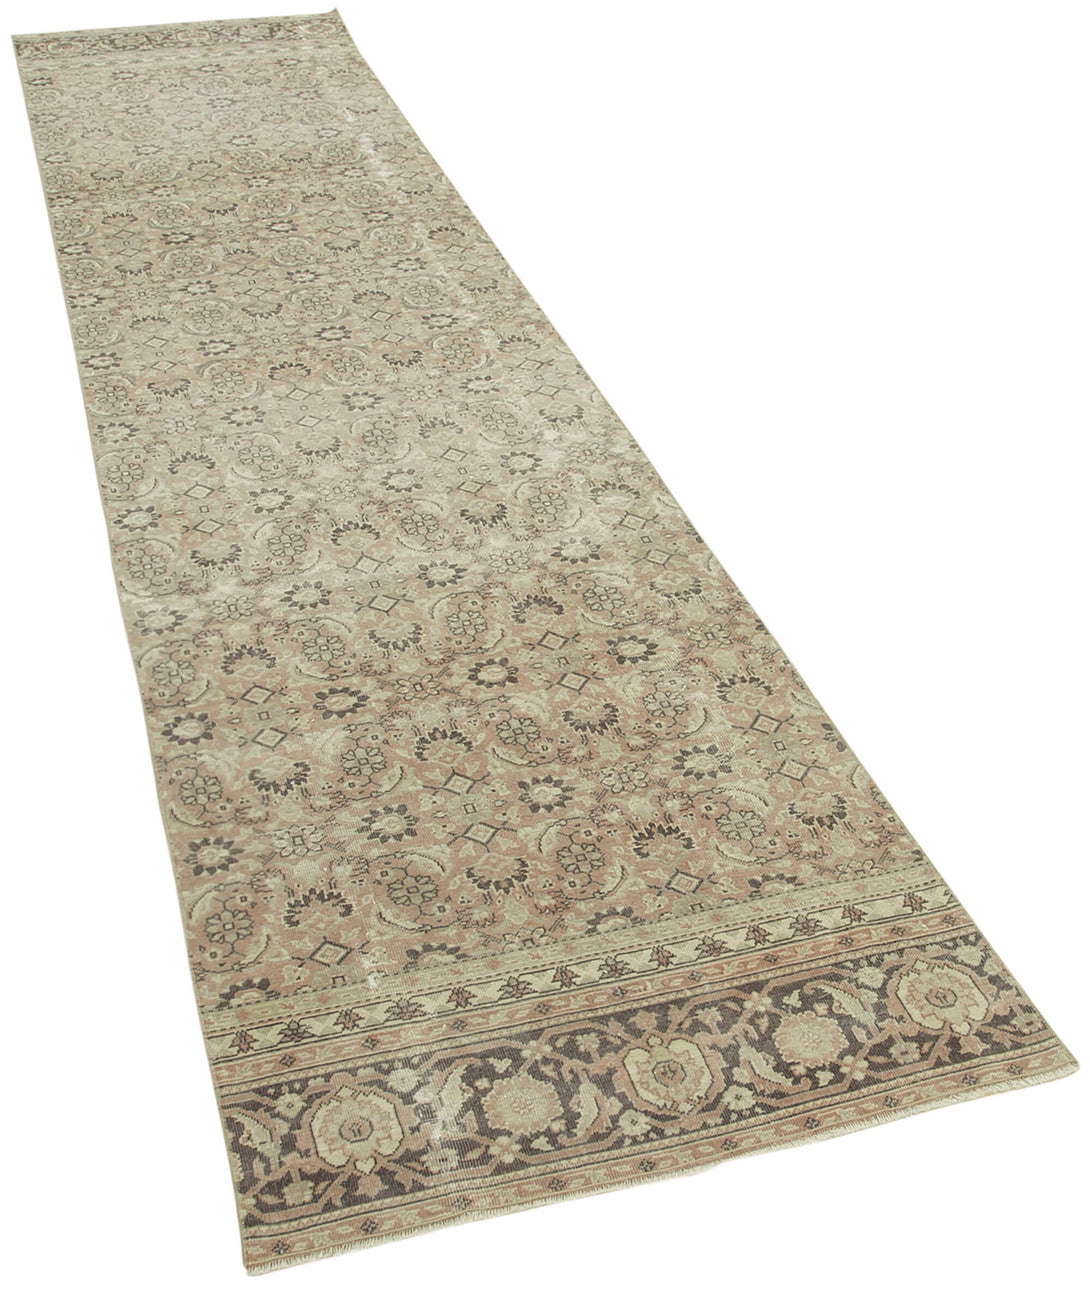 Handmade Overdyed Runner > Design# OL-AC-38111 > Size: 2'-8" x 12'-3", Carpet Culture Rugs, Handmade Rugs, NYC Rugs, New Rugs, Shop Rugs, Rug Store, Outlet Rugs, SoHo Rugs, Rugs in USA